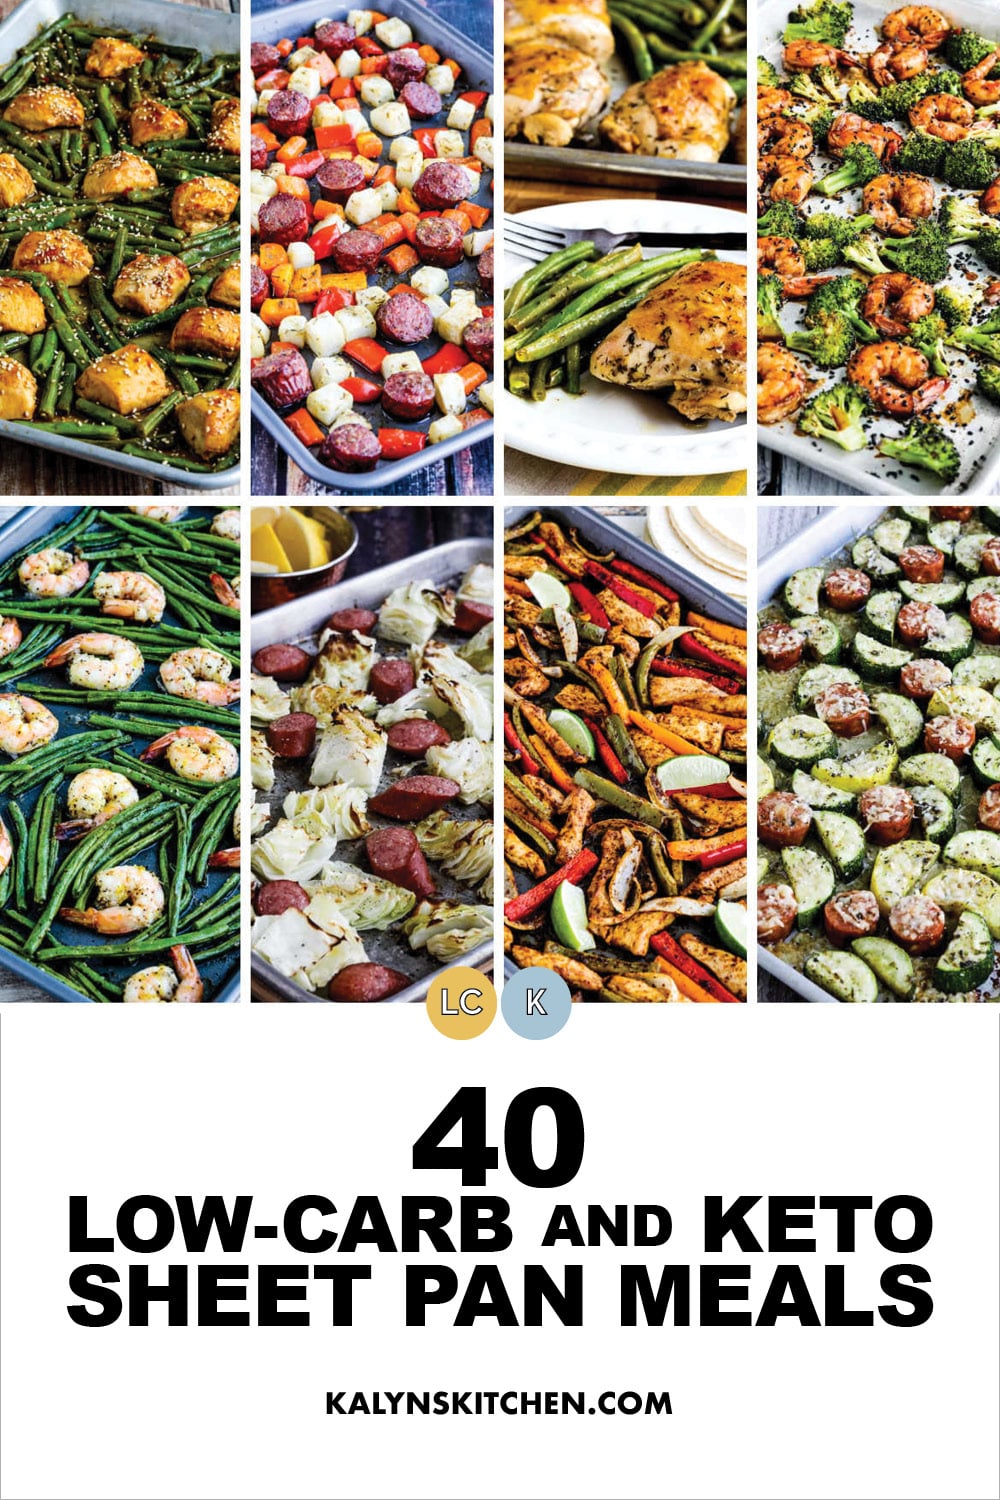 Pinterest image of 40 Low-Carb and Keto Sheet Pan Meals